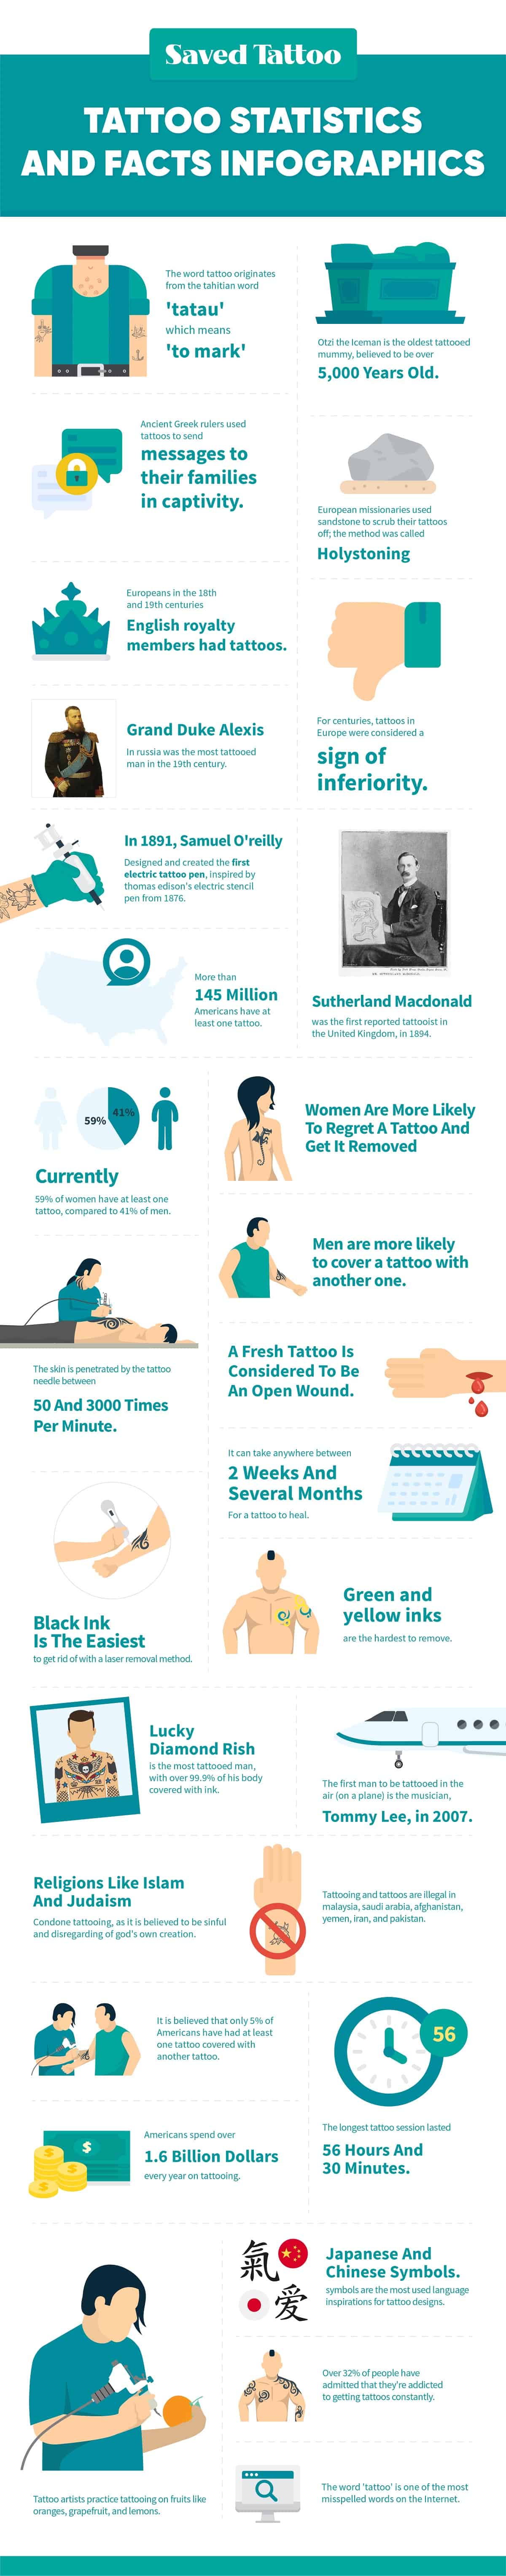 Tattoo Historic Facts and Stats